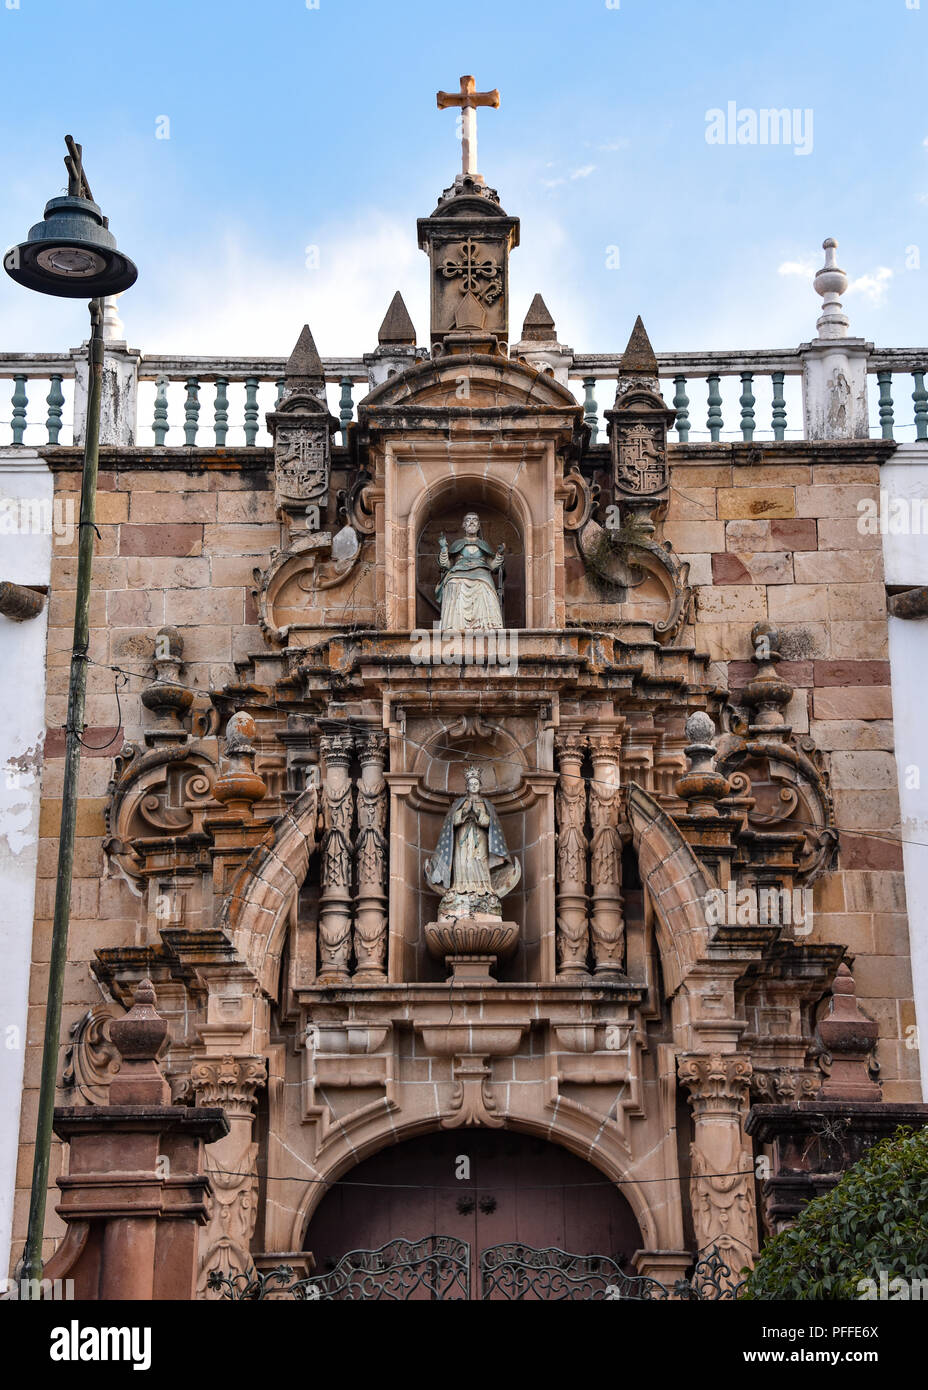 Close up details of the entrance to Sucre Metropolitan Cathedral, Sucre, Bolivia Stock Photo